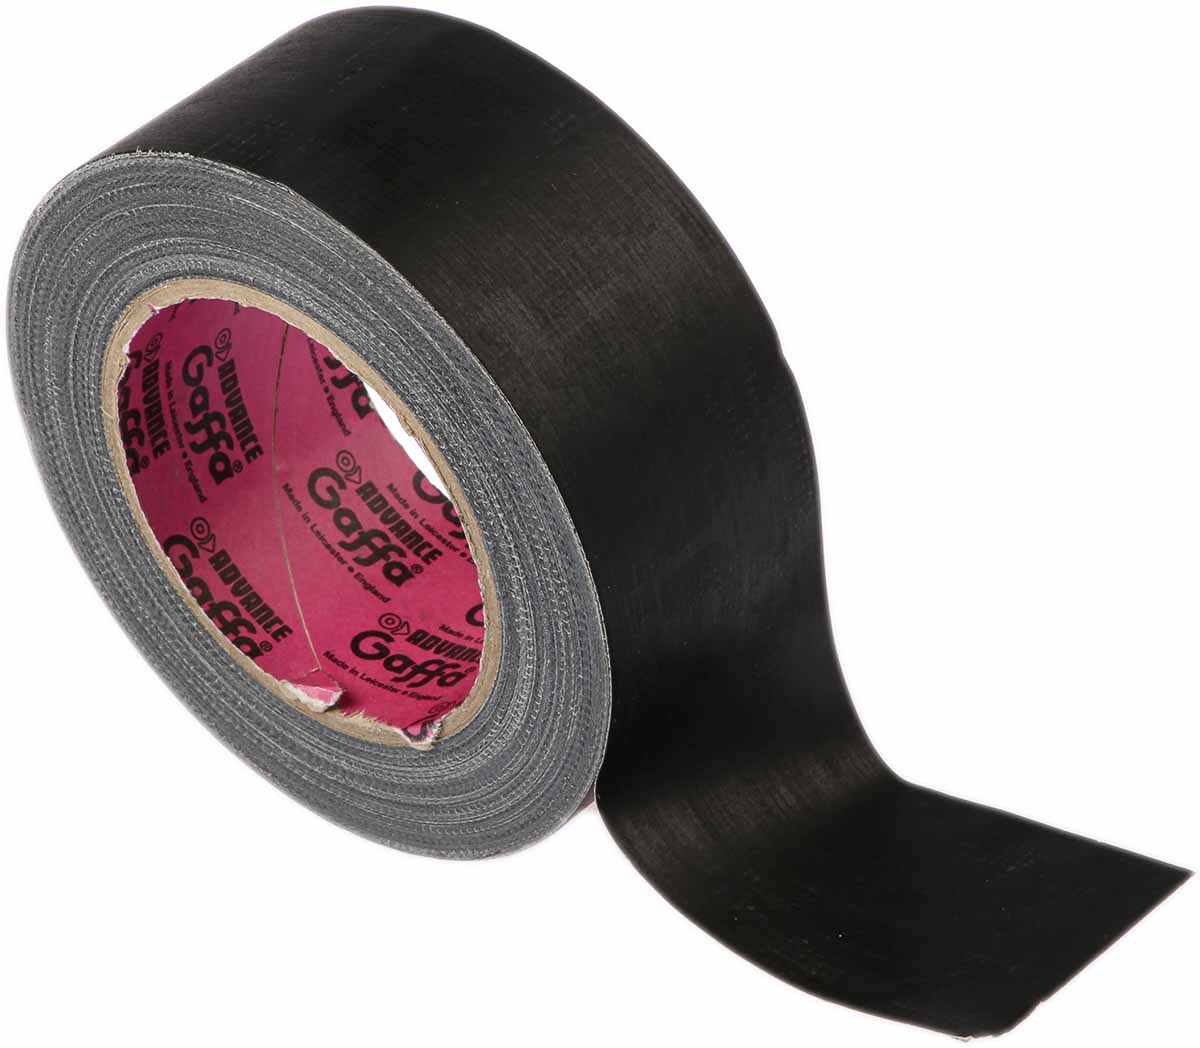 gaff tape vs duct tape